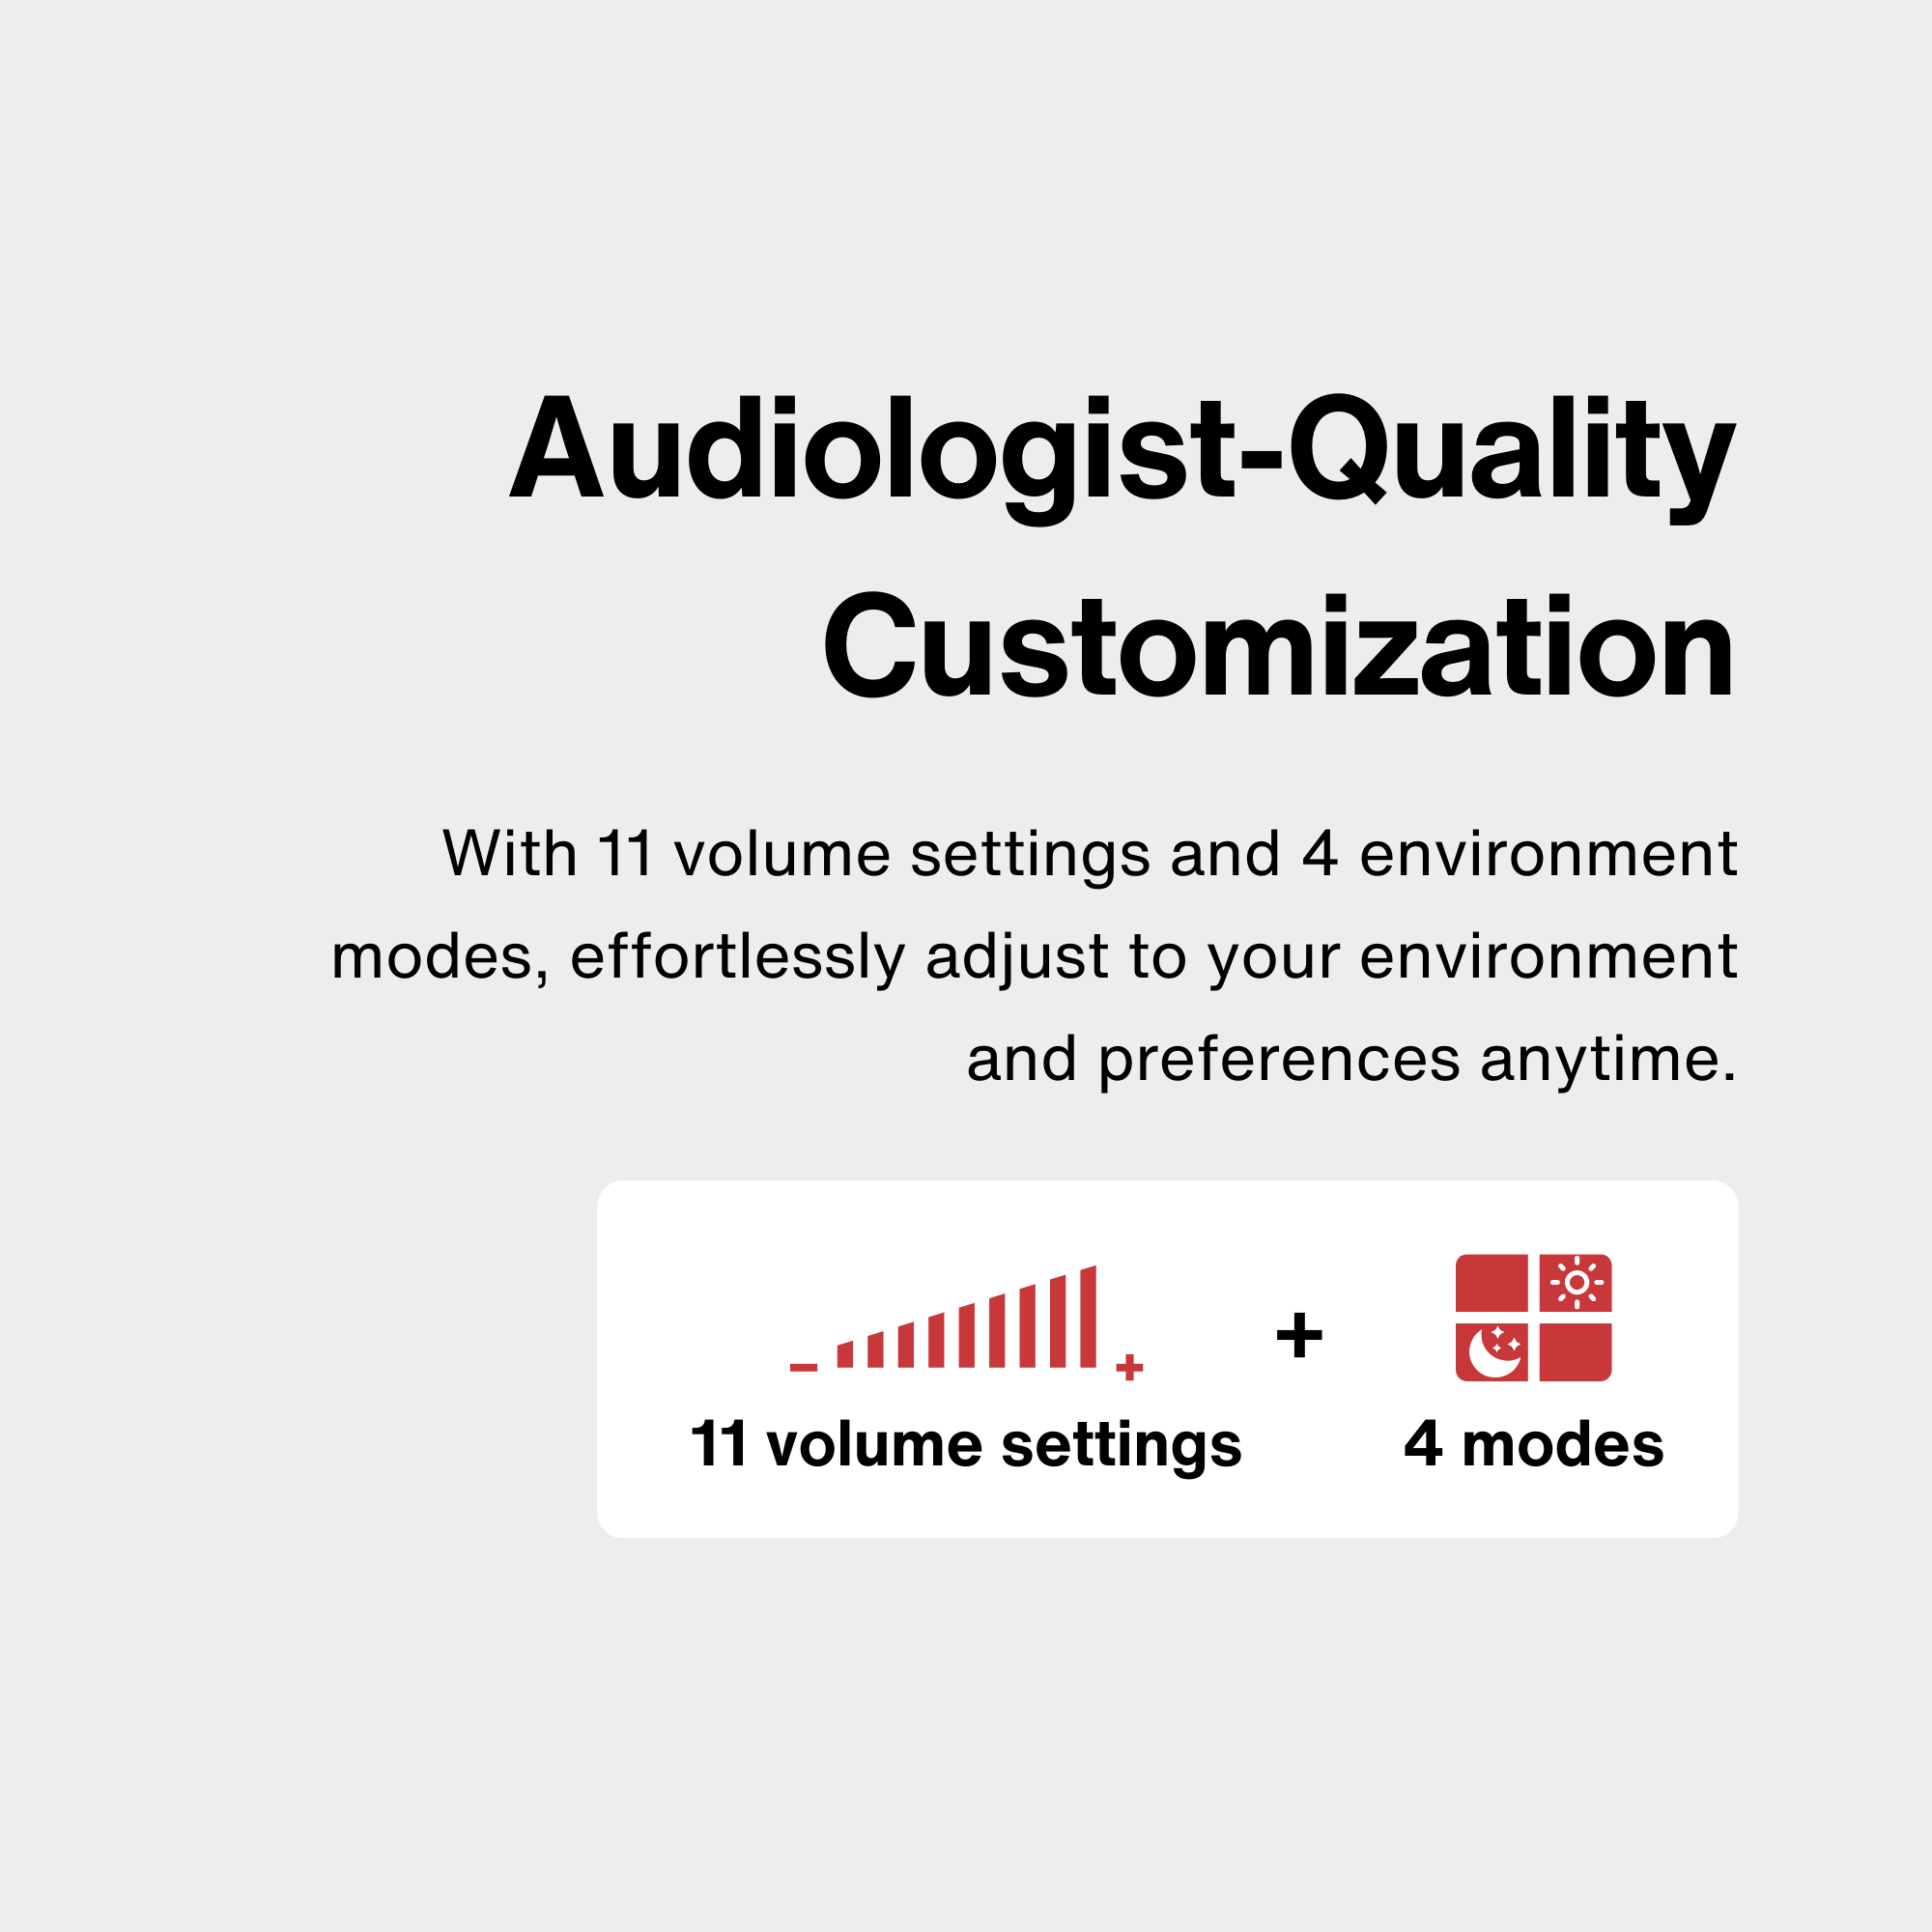 Audiologist-Quality Customization With 11 volume settings and 4 environment modes, effortlessly adjust to your environment and preferences anytime.